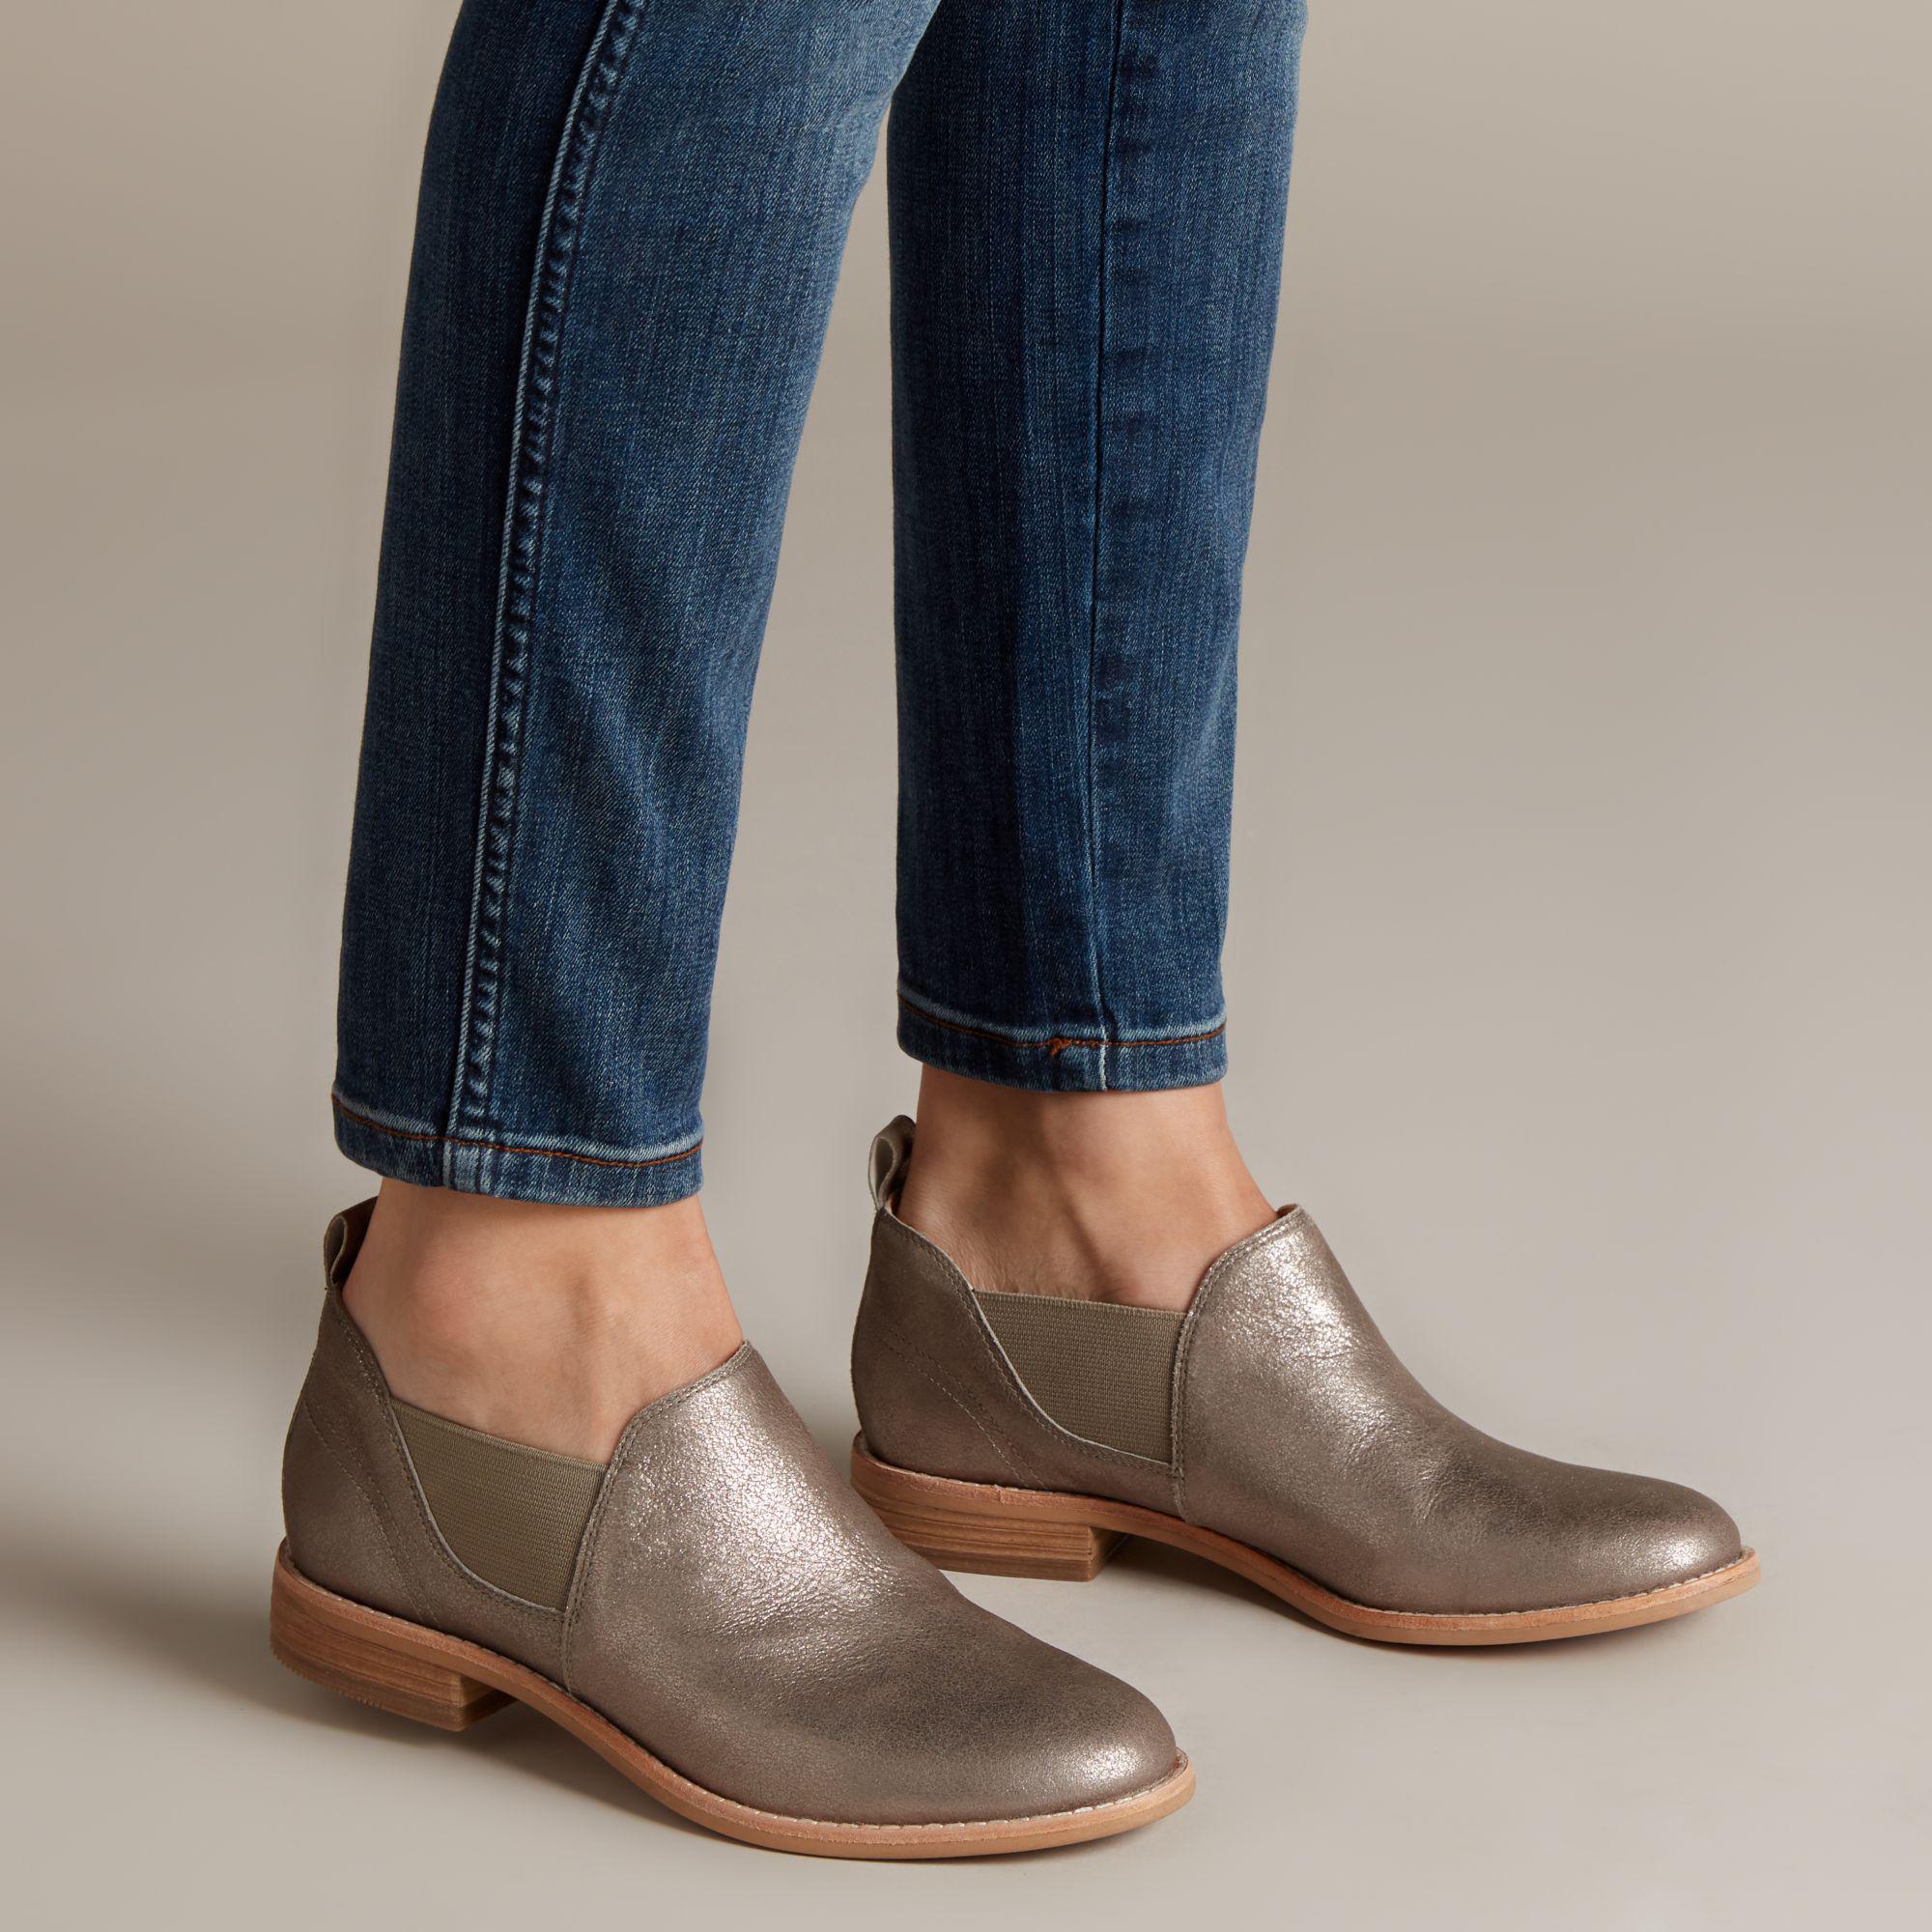 clarks artisan edenvale page chelsea boot